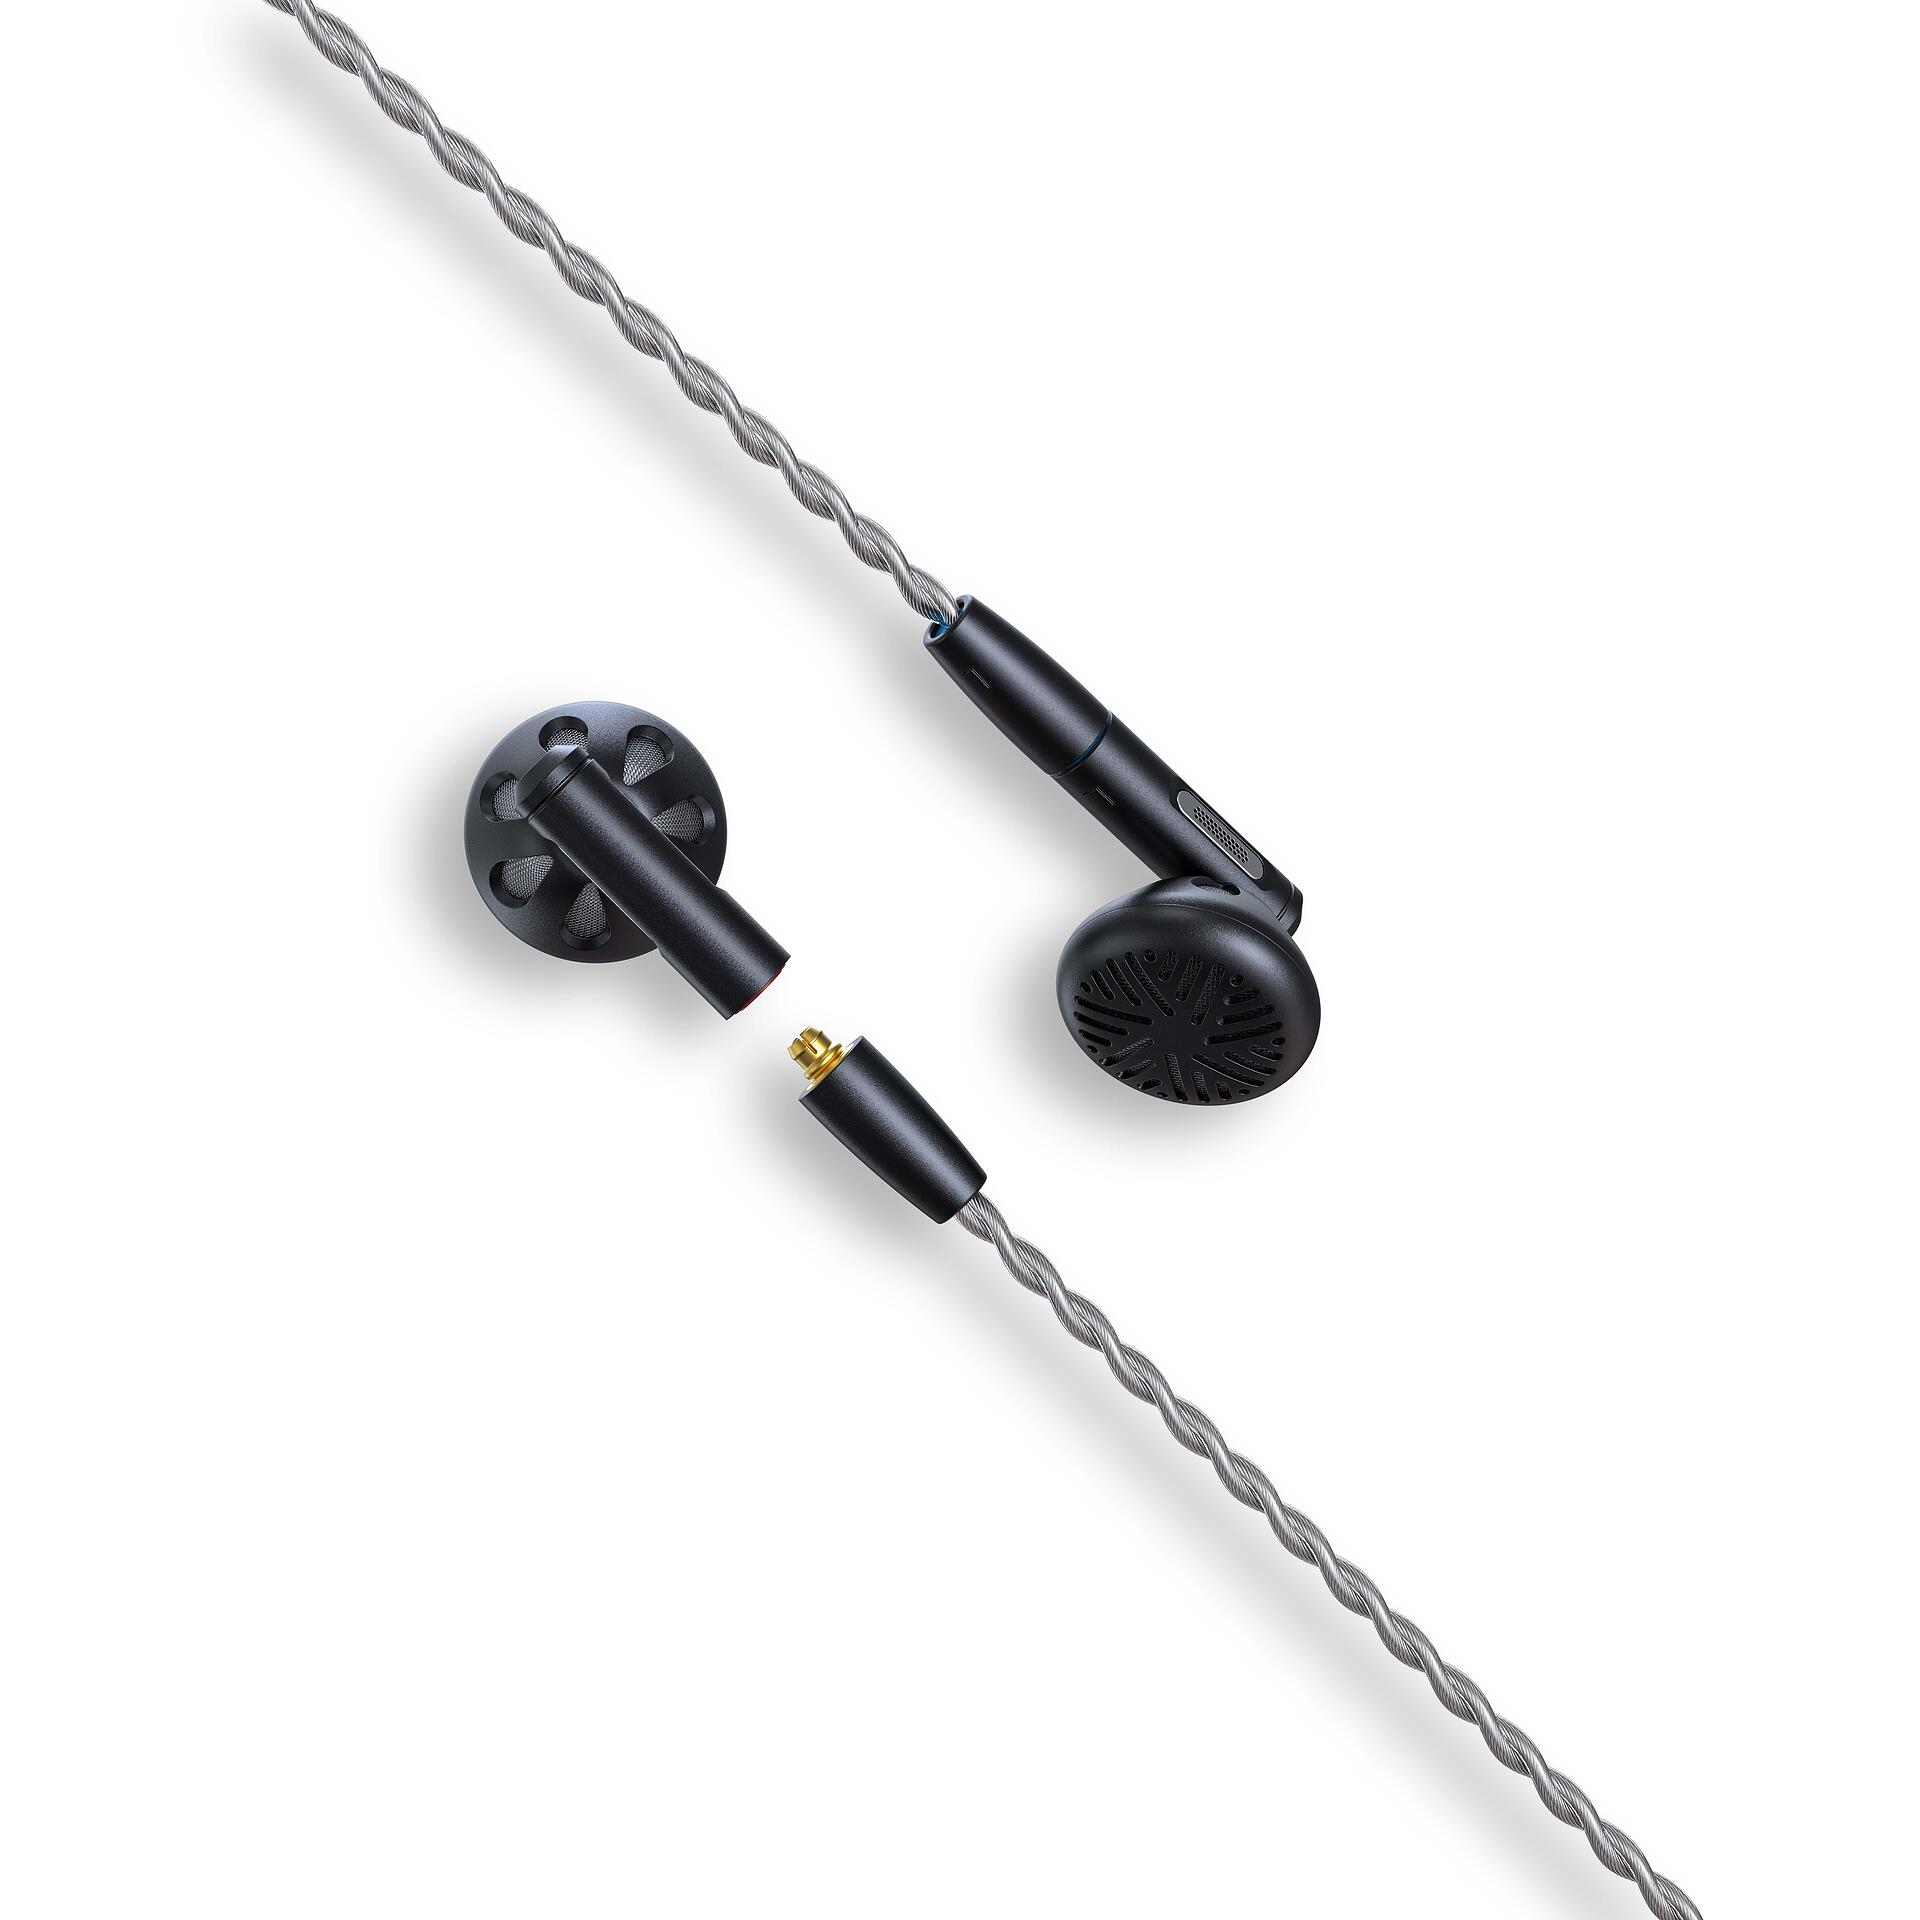 Detachable cable carbon-based dynamic driver earbuds Fiio FF5